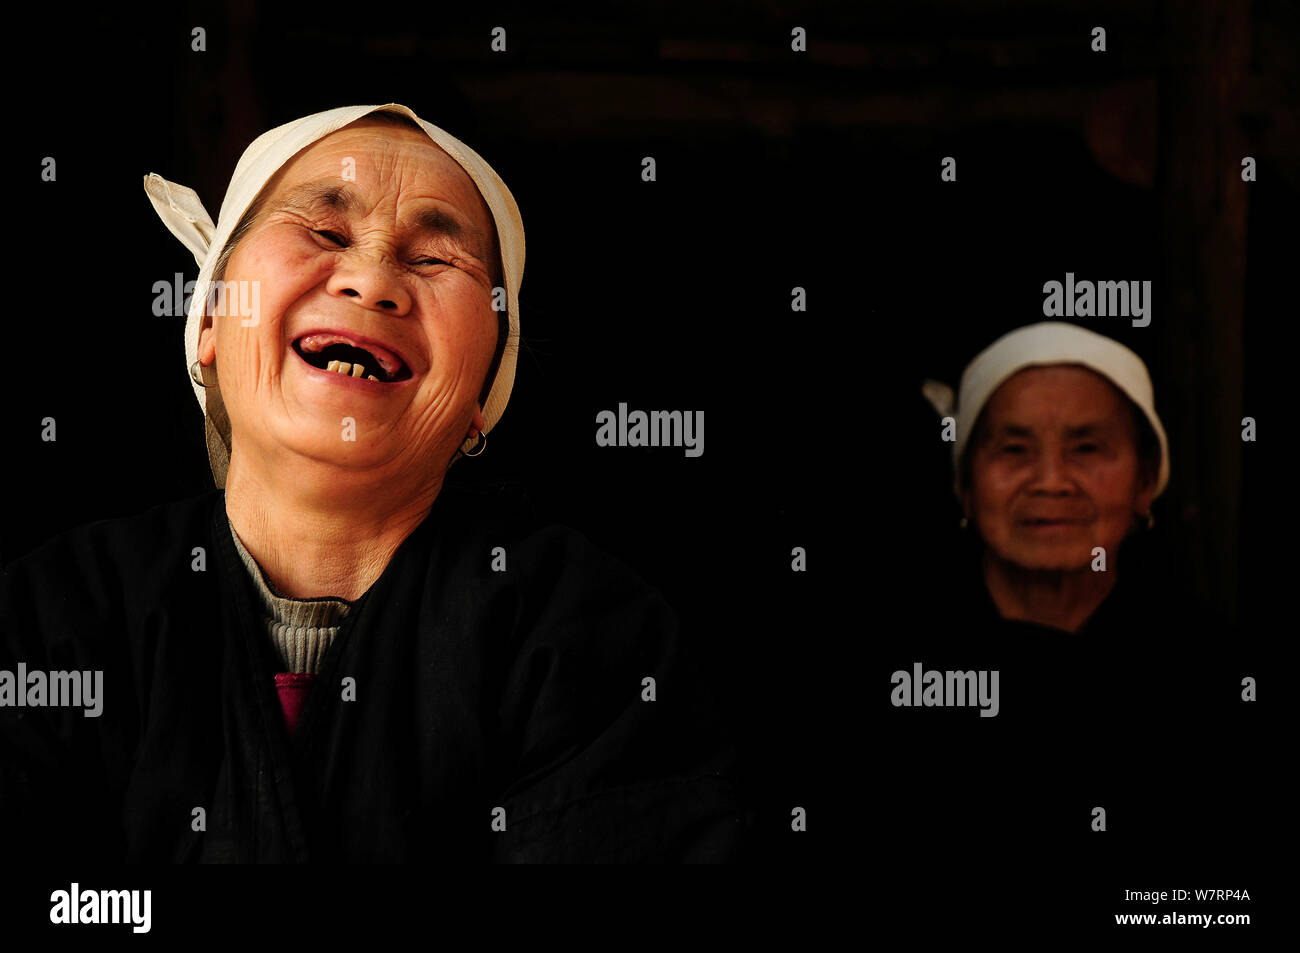 Two Dong women, one laughing, in a dark room, Sanjiang Dong Village in the province of Guangxi, China. April 2009. Winner of the Photographer of the Year, Portrait Category, 4th Pollux Awards, 2012 Stock Photo